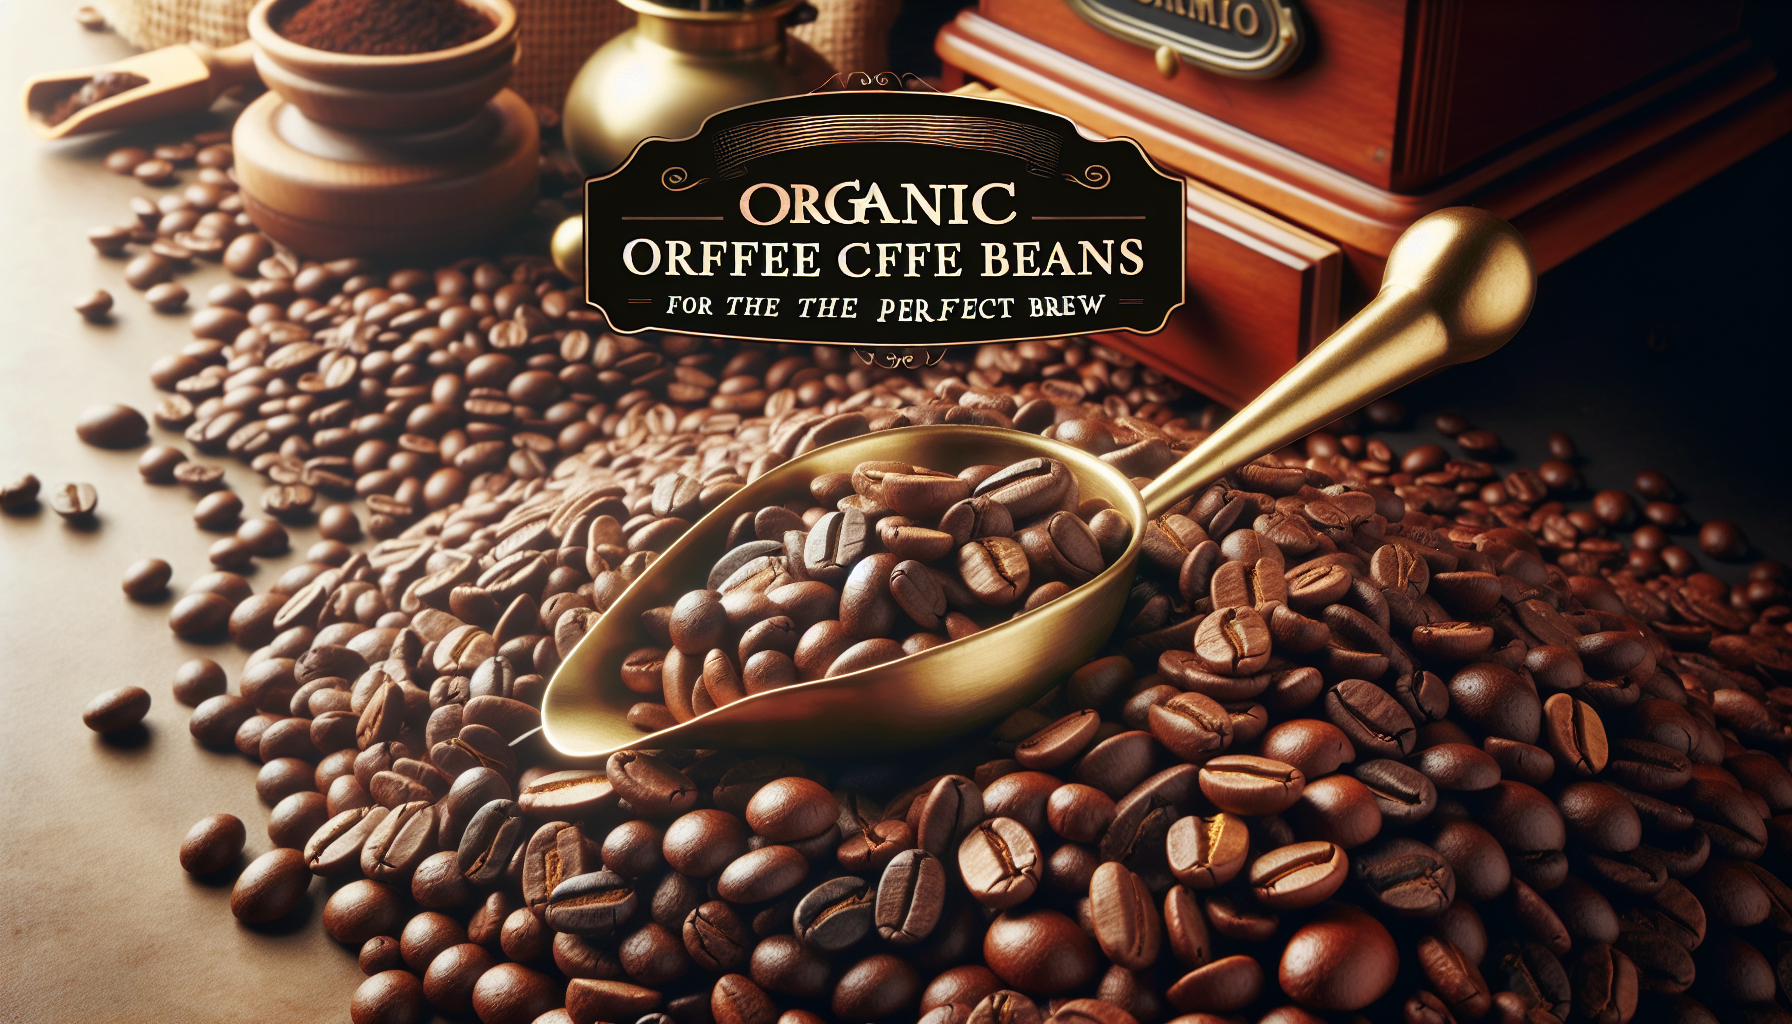 An assortment of top-quality organic coffee beans beautifully stacked. The beans are a mix of different varieties, each exhibiting a rich color from light brown to dark brown. The beans are shiny, ind